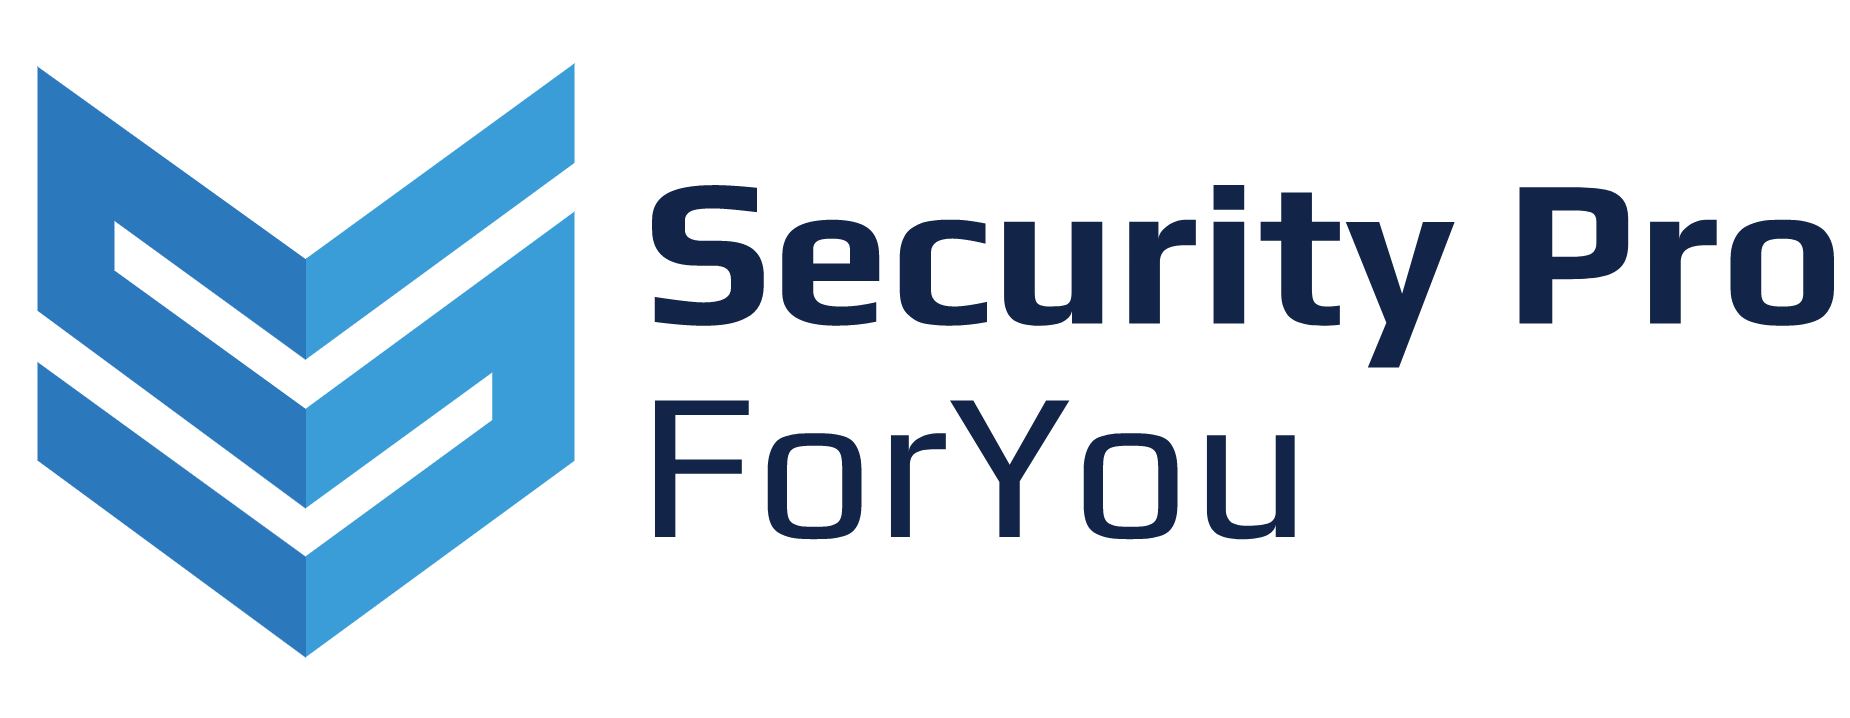 Security Pro For You Offers Professional Security Services